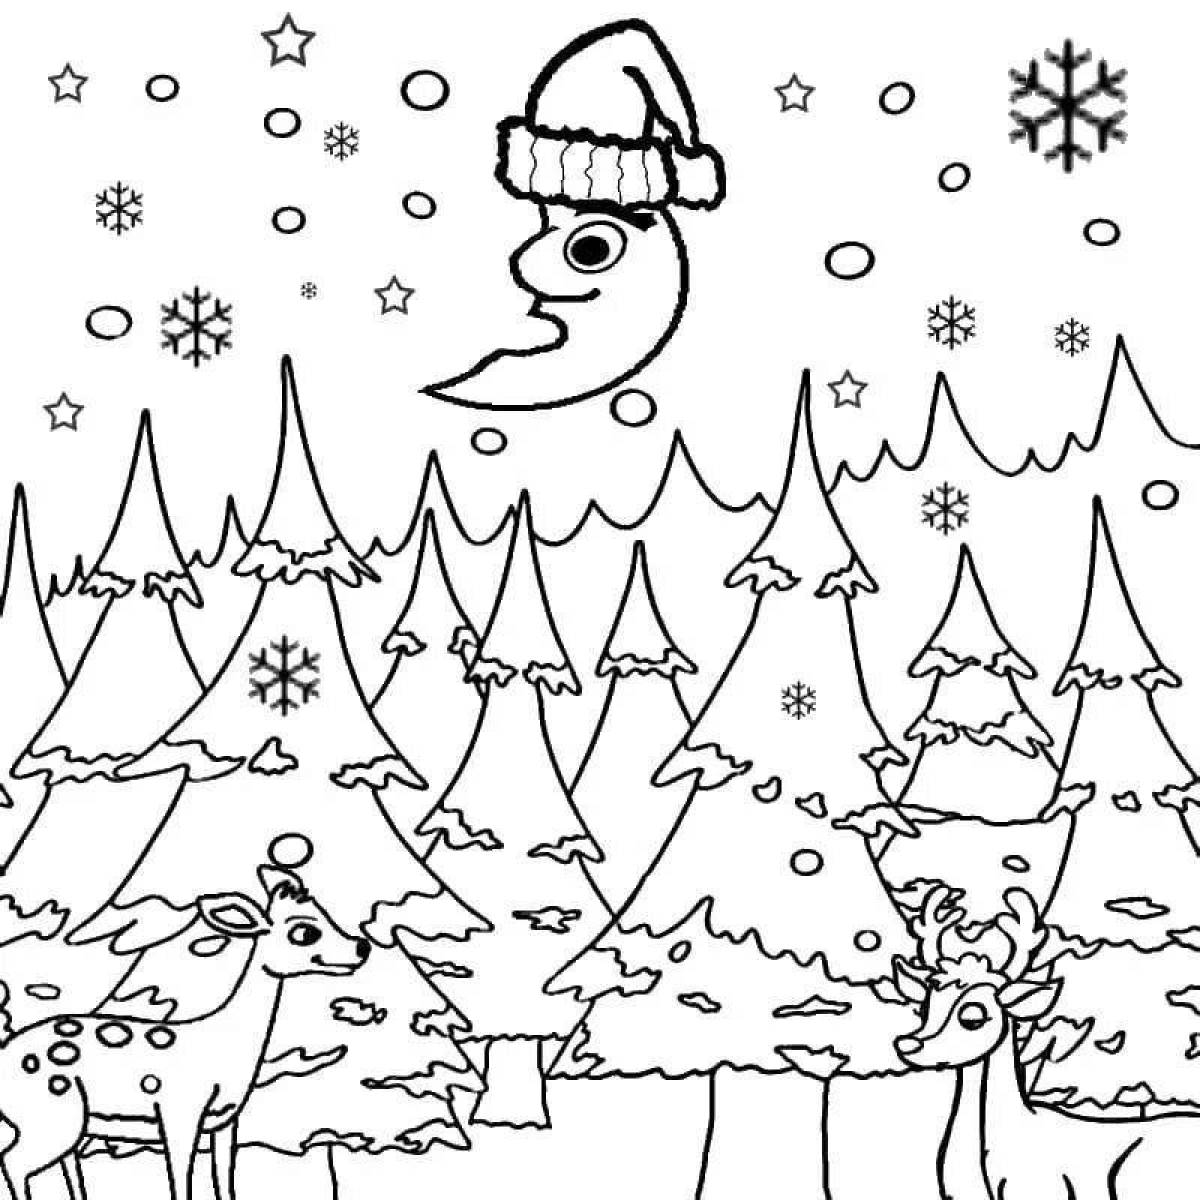 Serene coloring book for kids winter forest 3 4 years old